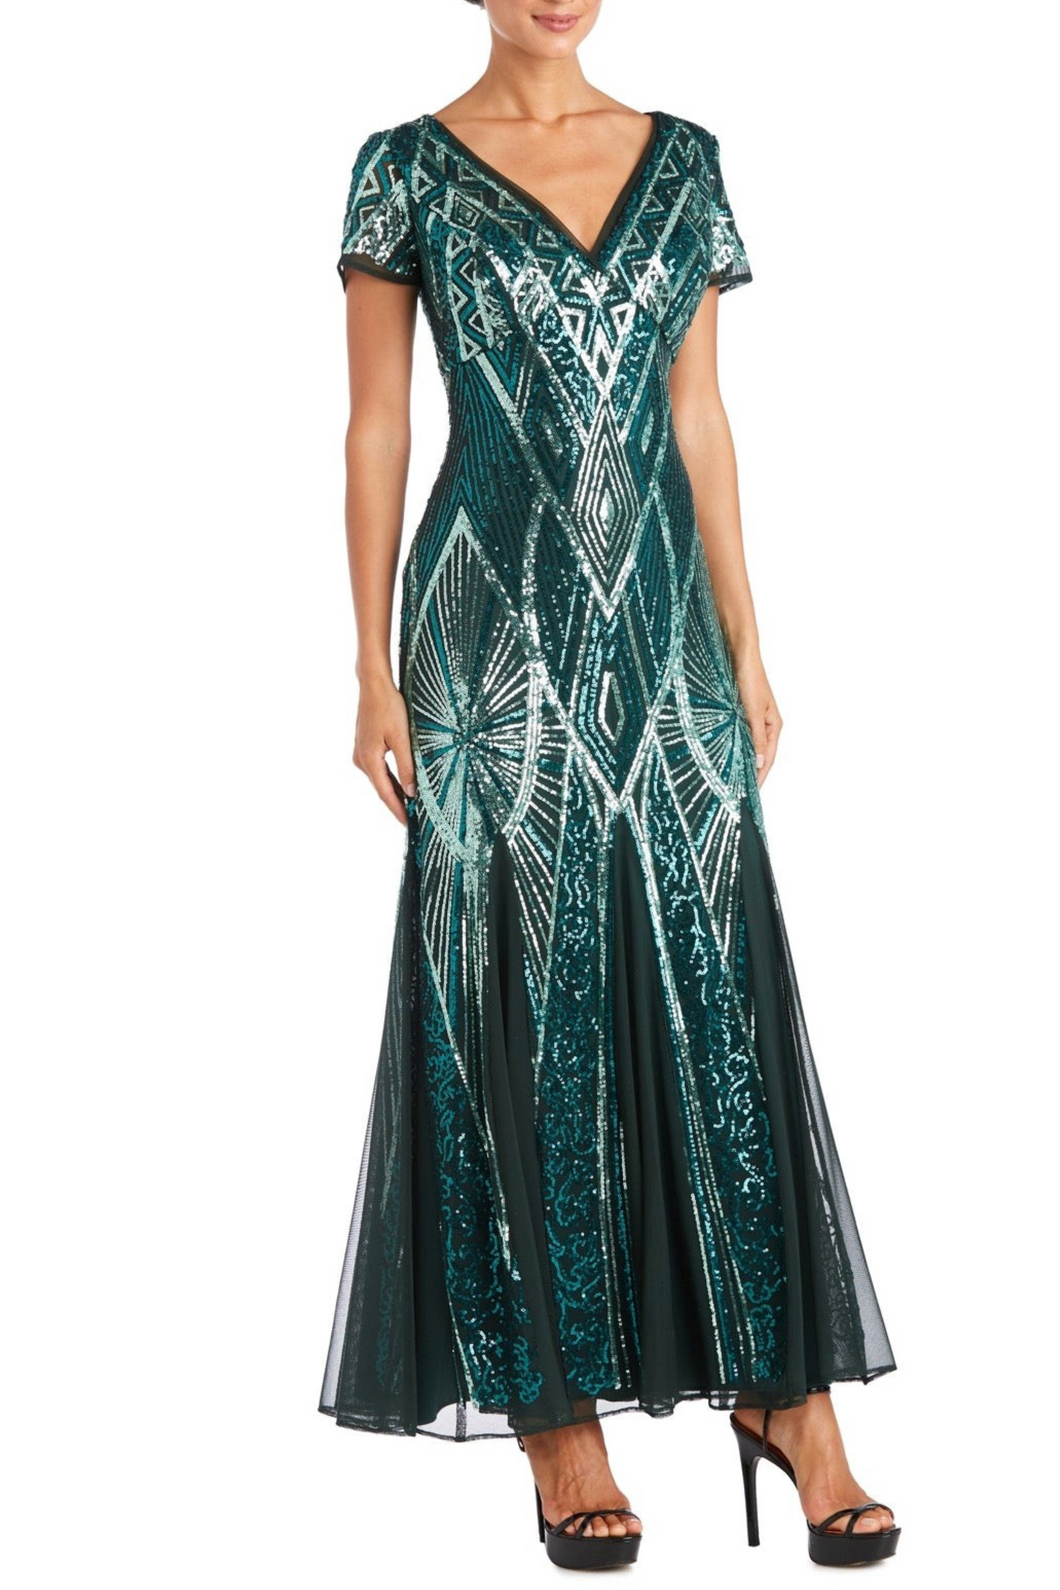 RM Richards Emerald Sequin Godet, ONLY Size 12 Remaining, Women's Formals, Coctail Attire, Party Apparel